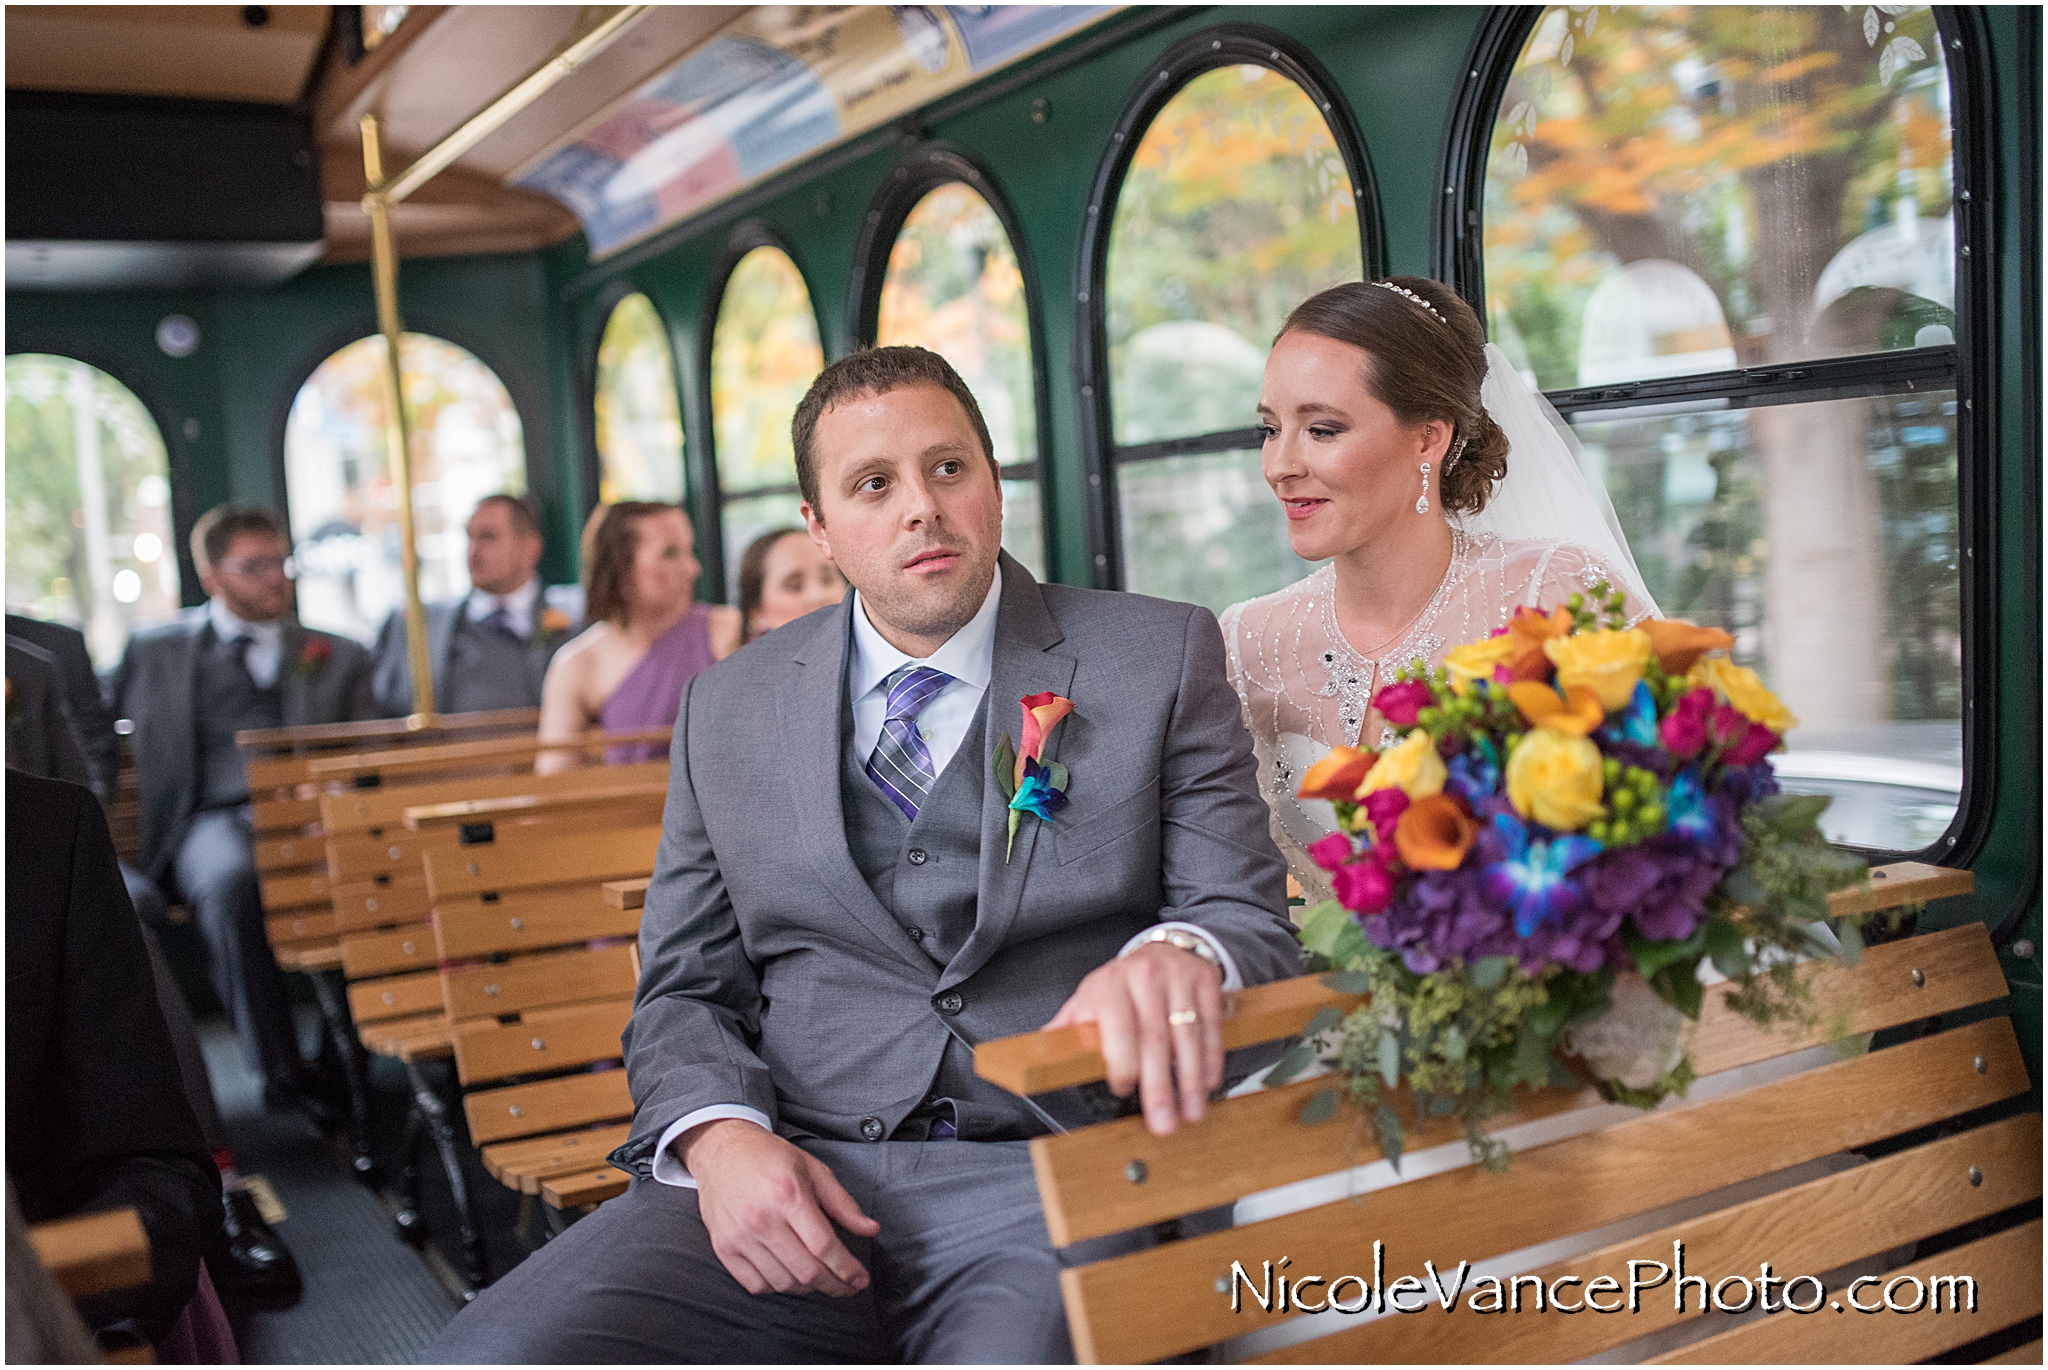 Trolley ride to the wedding reception at The Brownstone by Richmond Trolley.